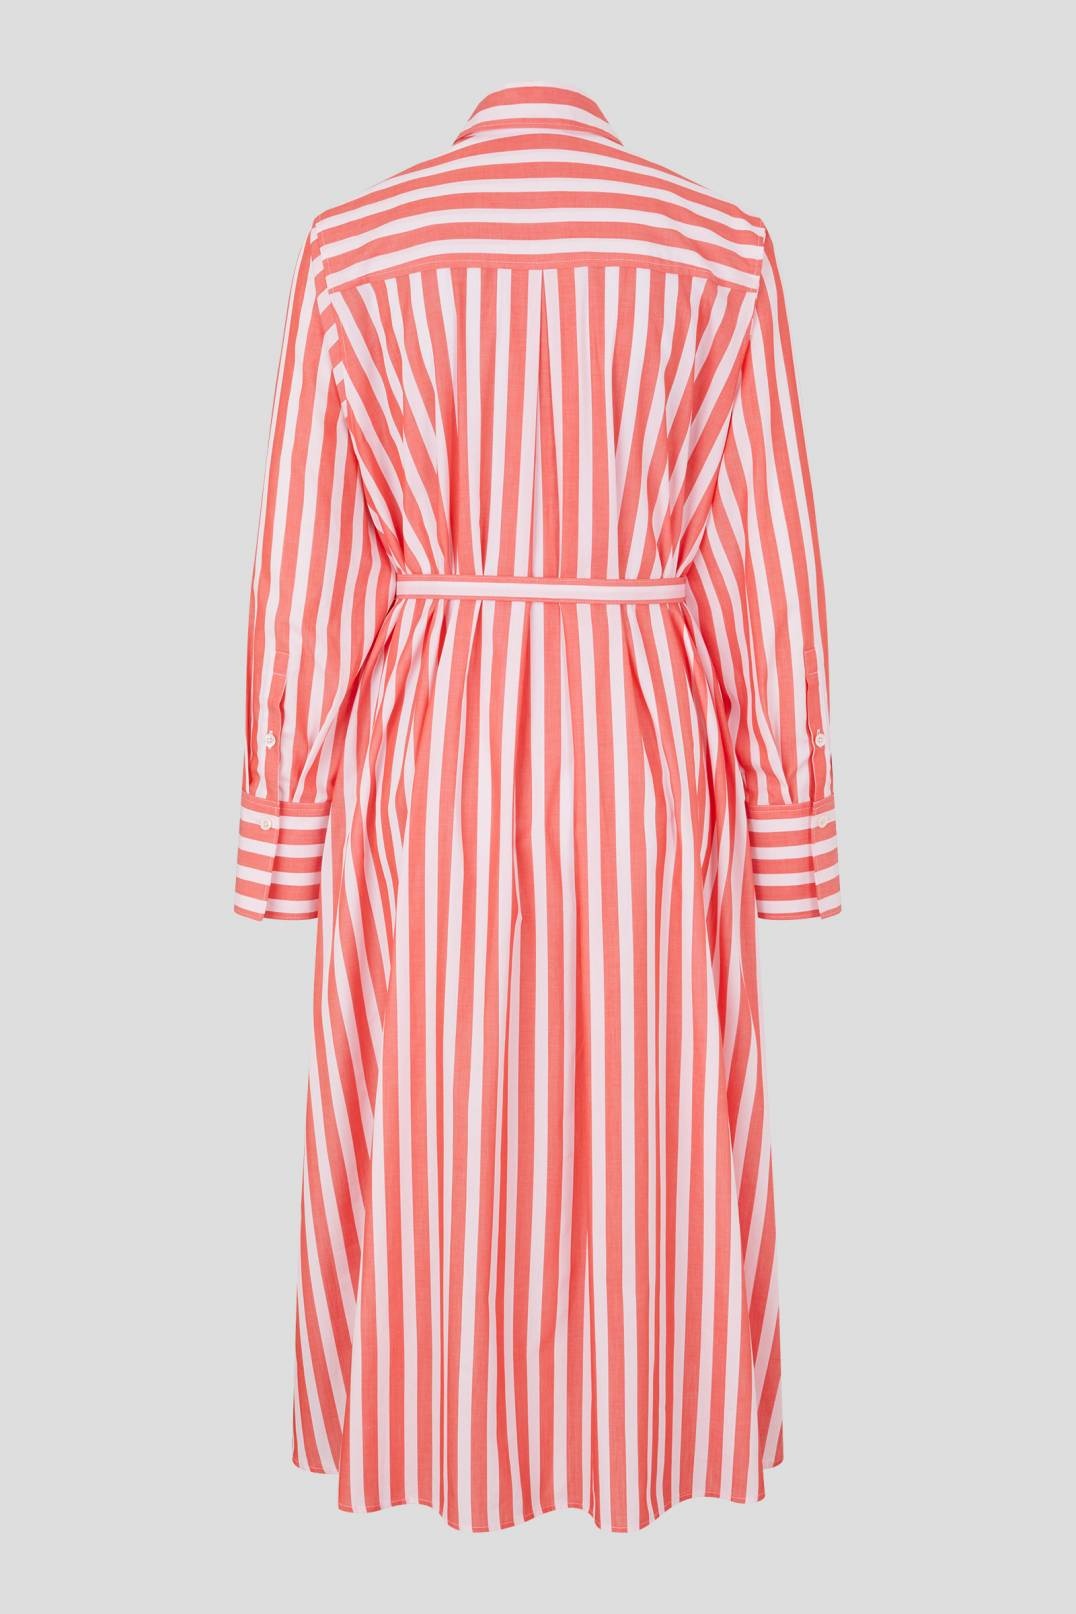 LIA SHIRT DRESS IN RED/OFF-WHITE - 5